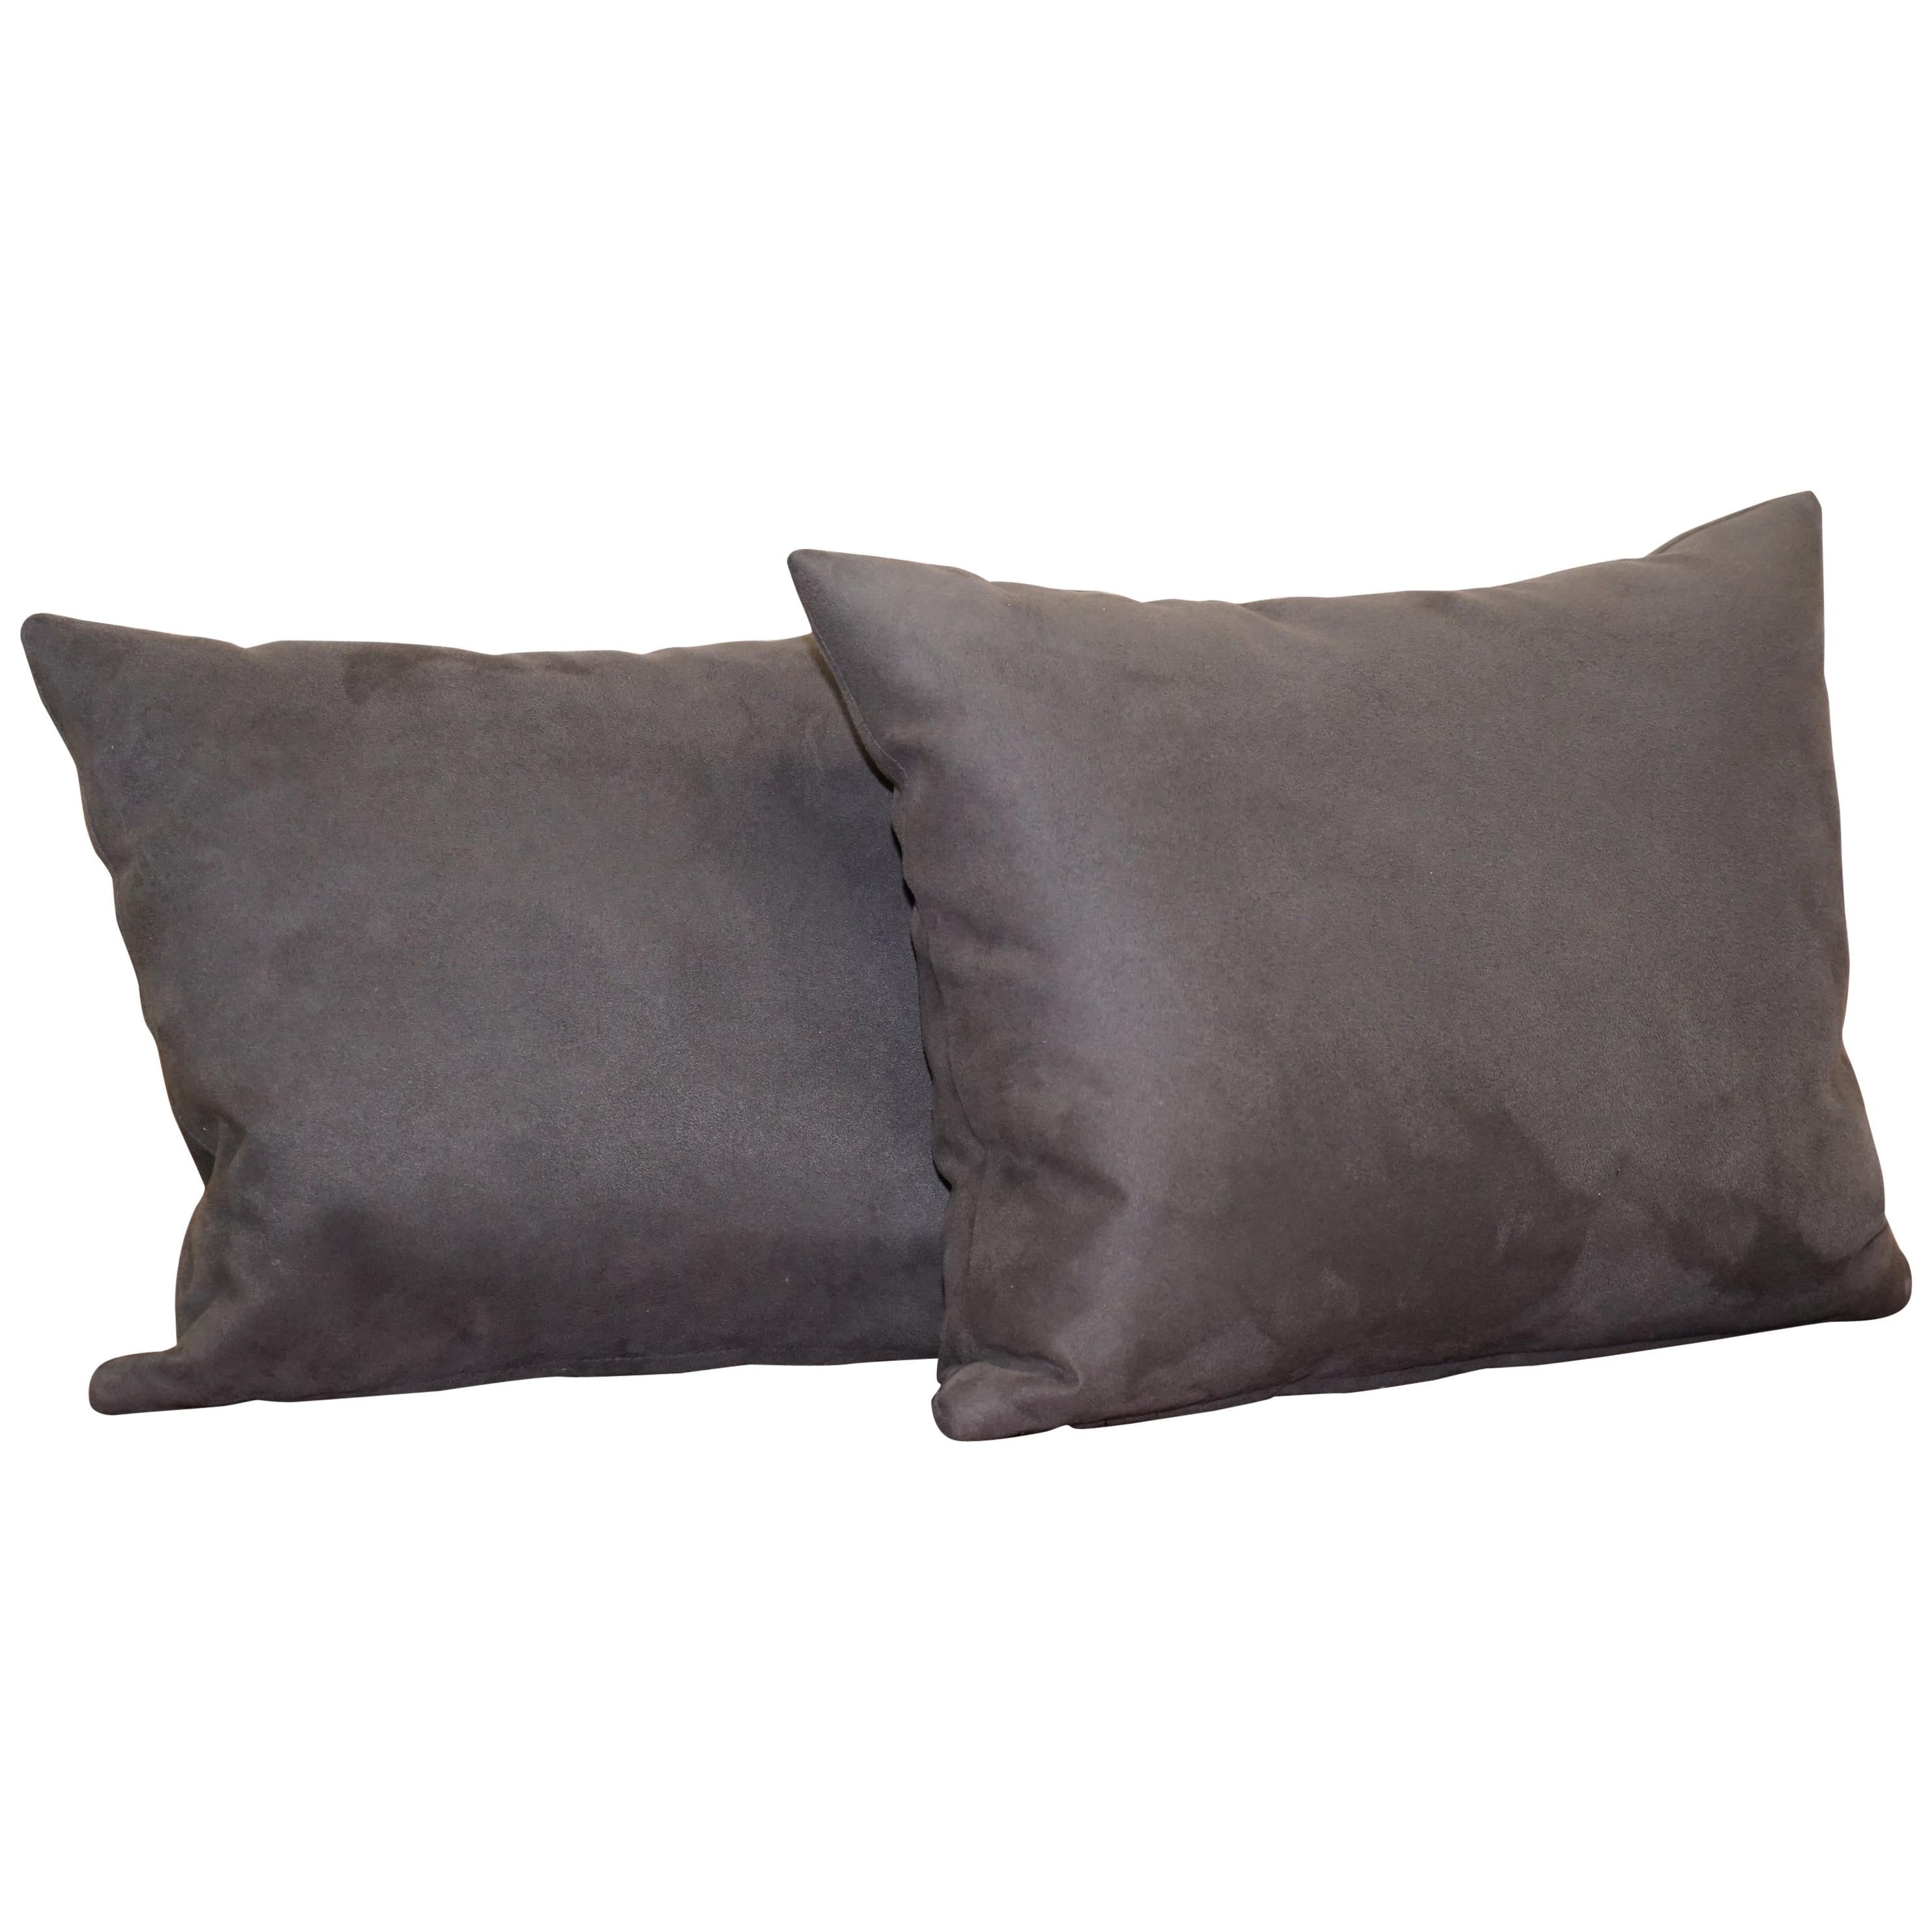 Lovely Pair of Soft Suede Large Grey Scatter Cushions from Fendi Sofa